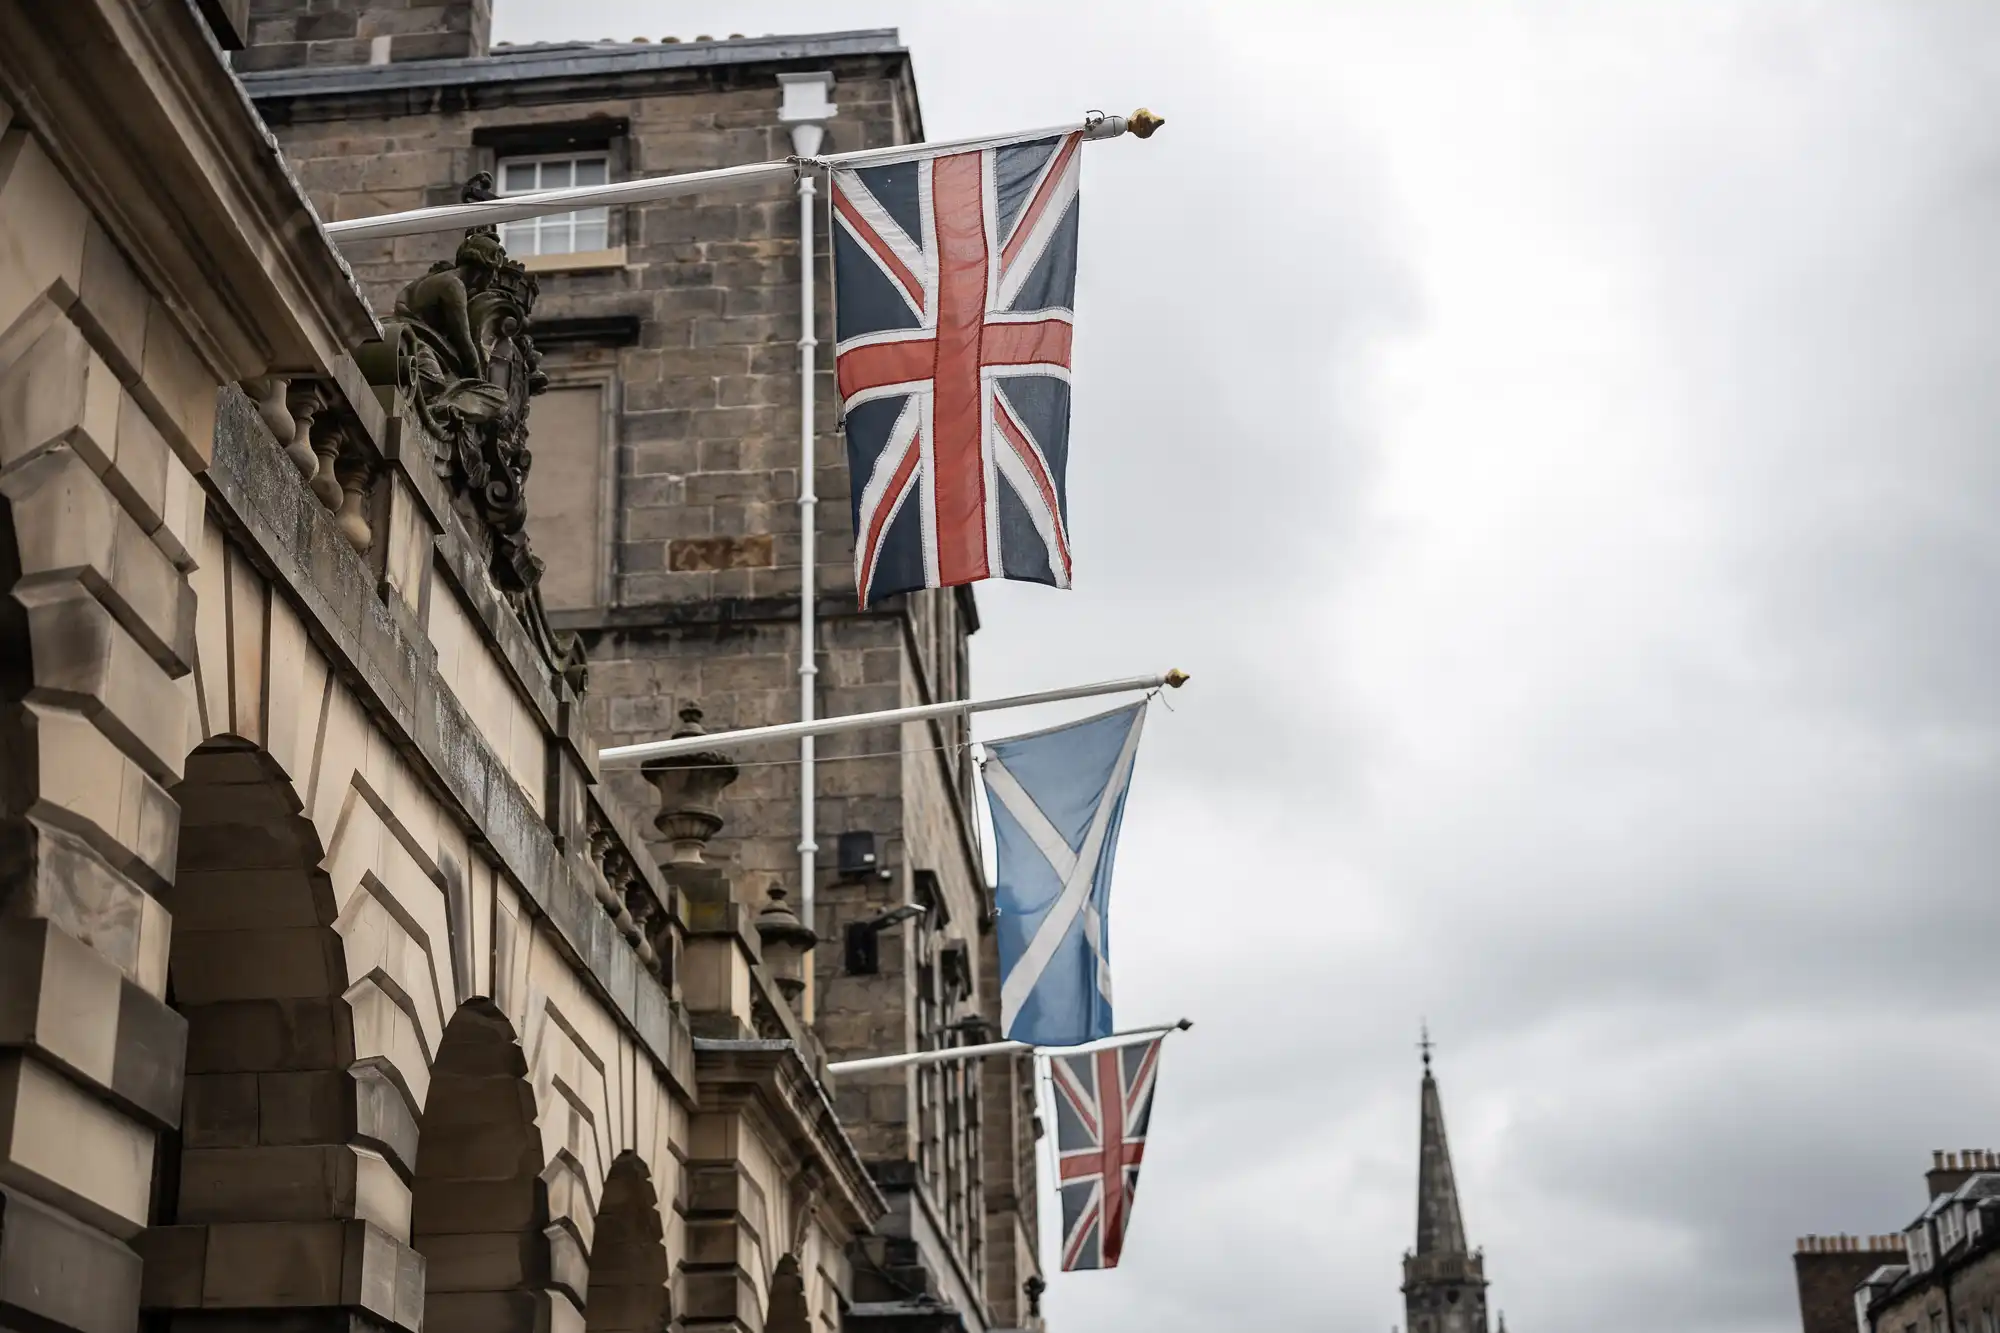 Flags of the United Kingdom and Scotland are displayed on flagpoles attached to a stone building, with a cloudy sky and a tower visible in the background.